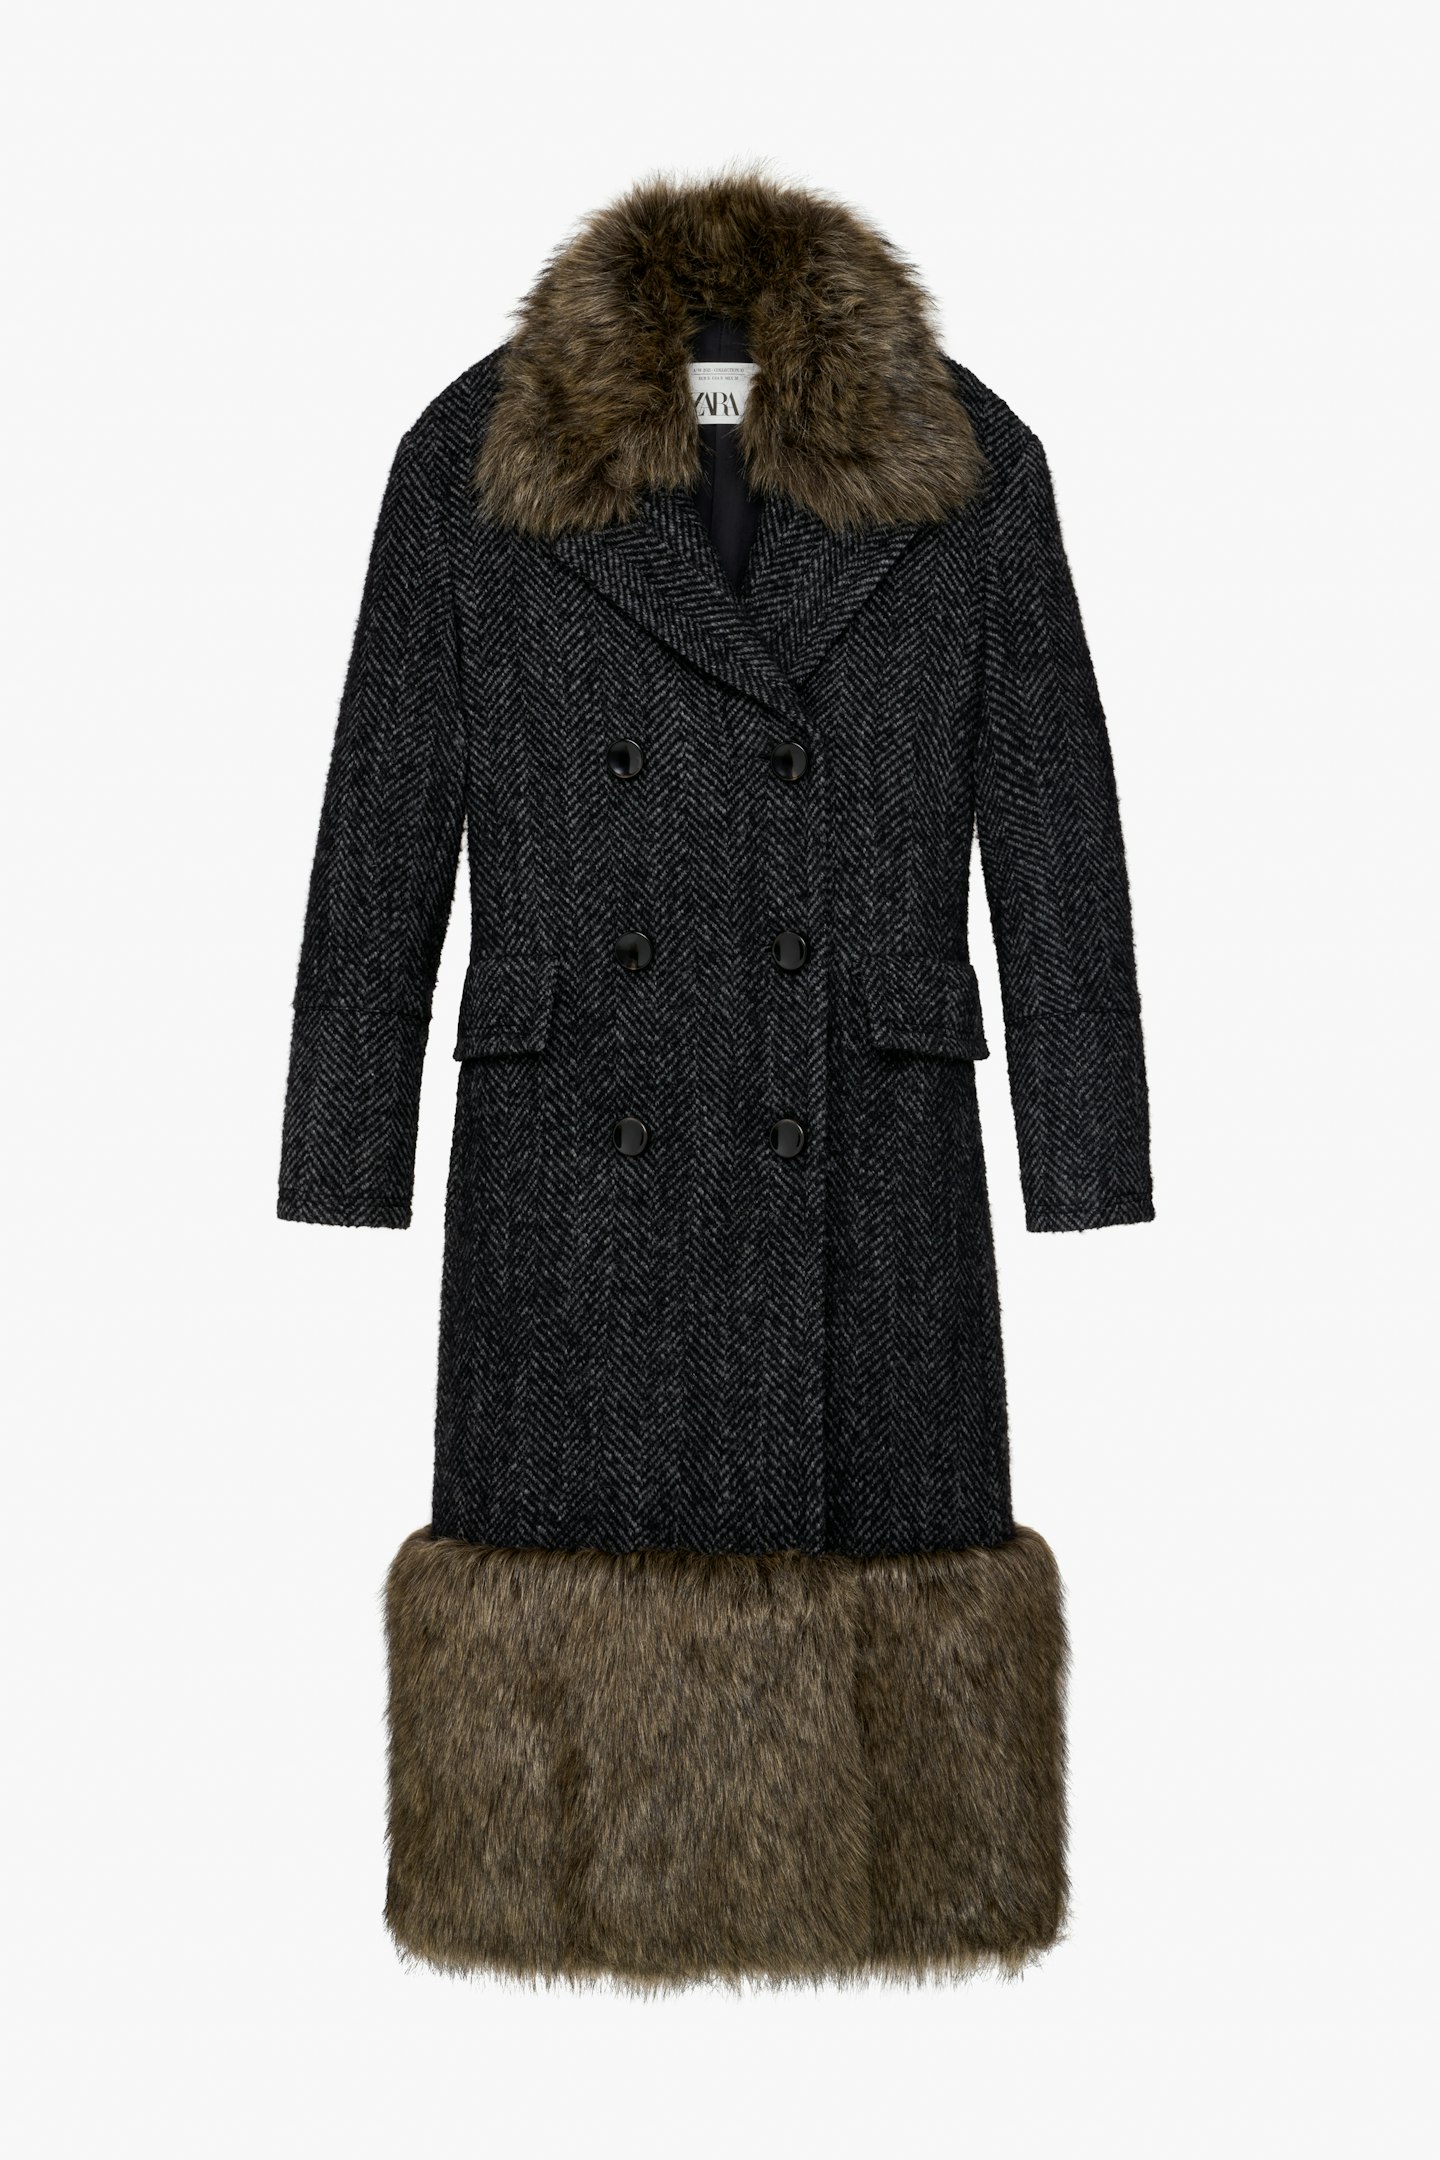 Limited Edition Matching Coat, £189